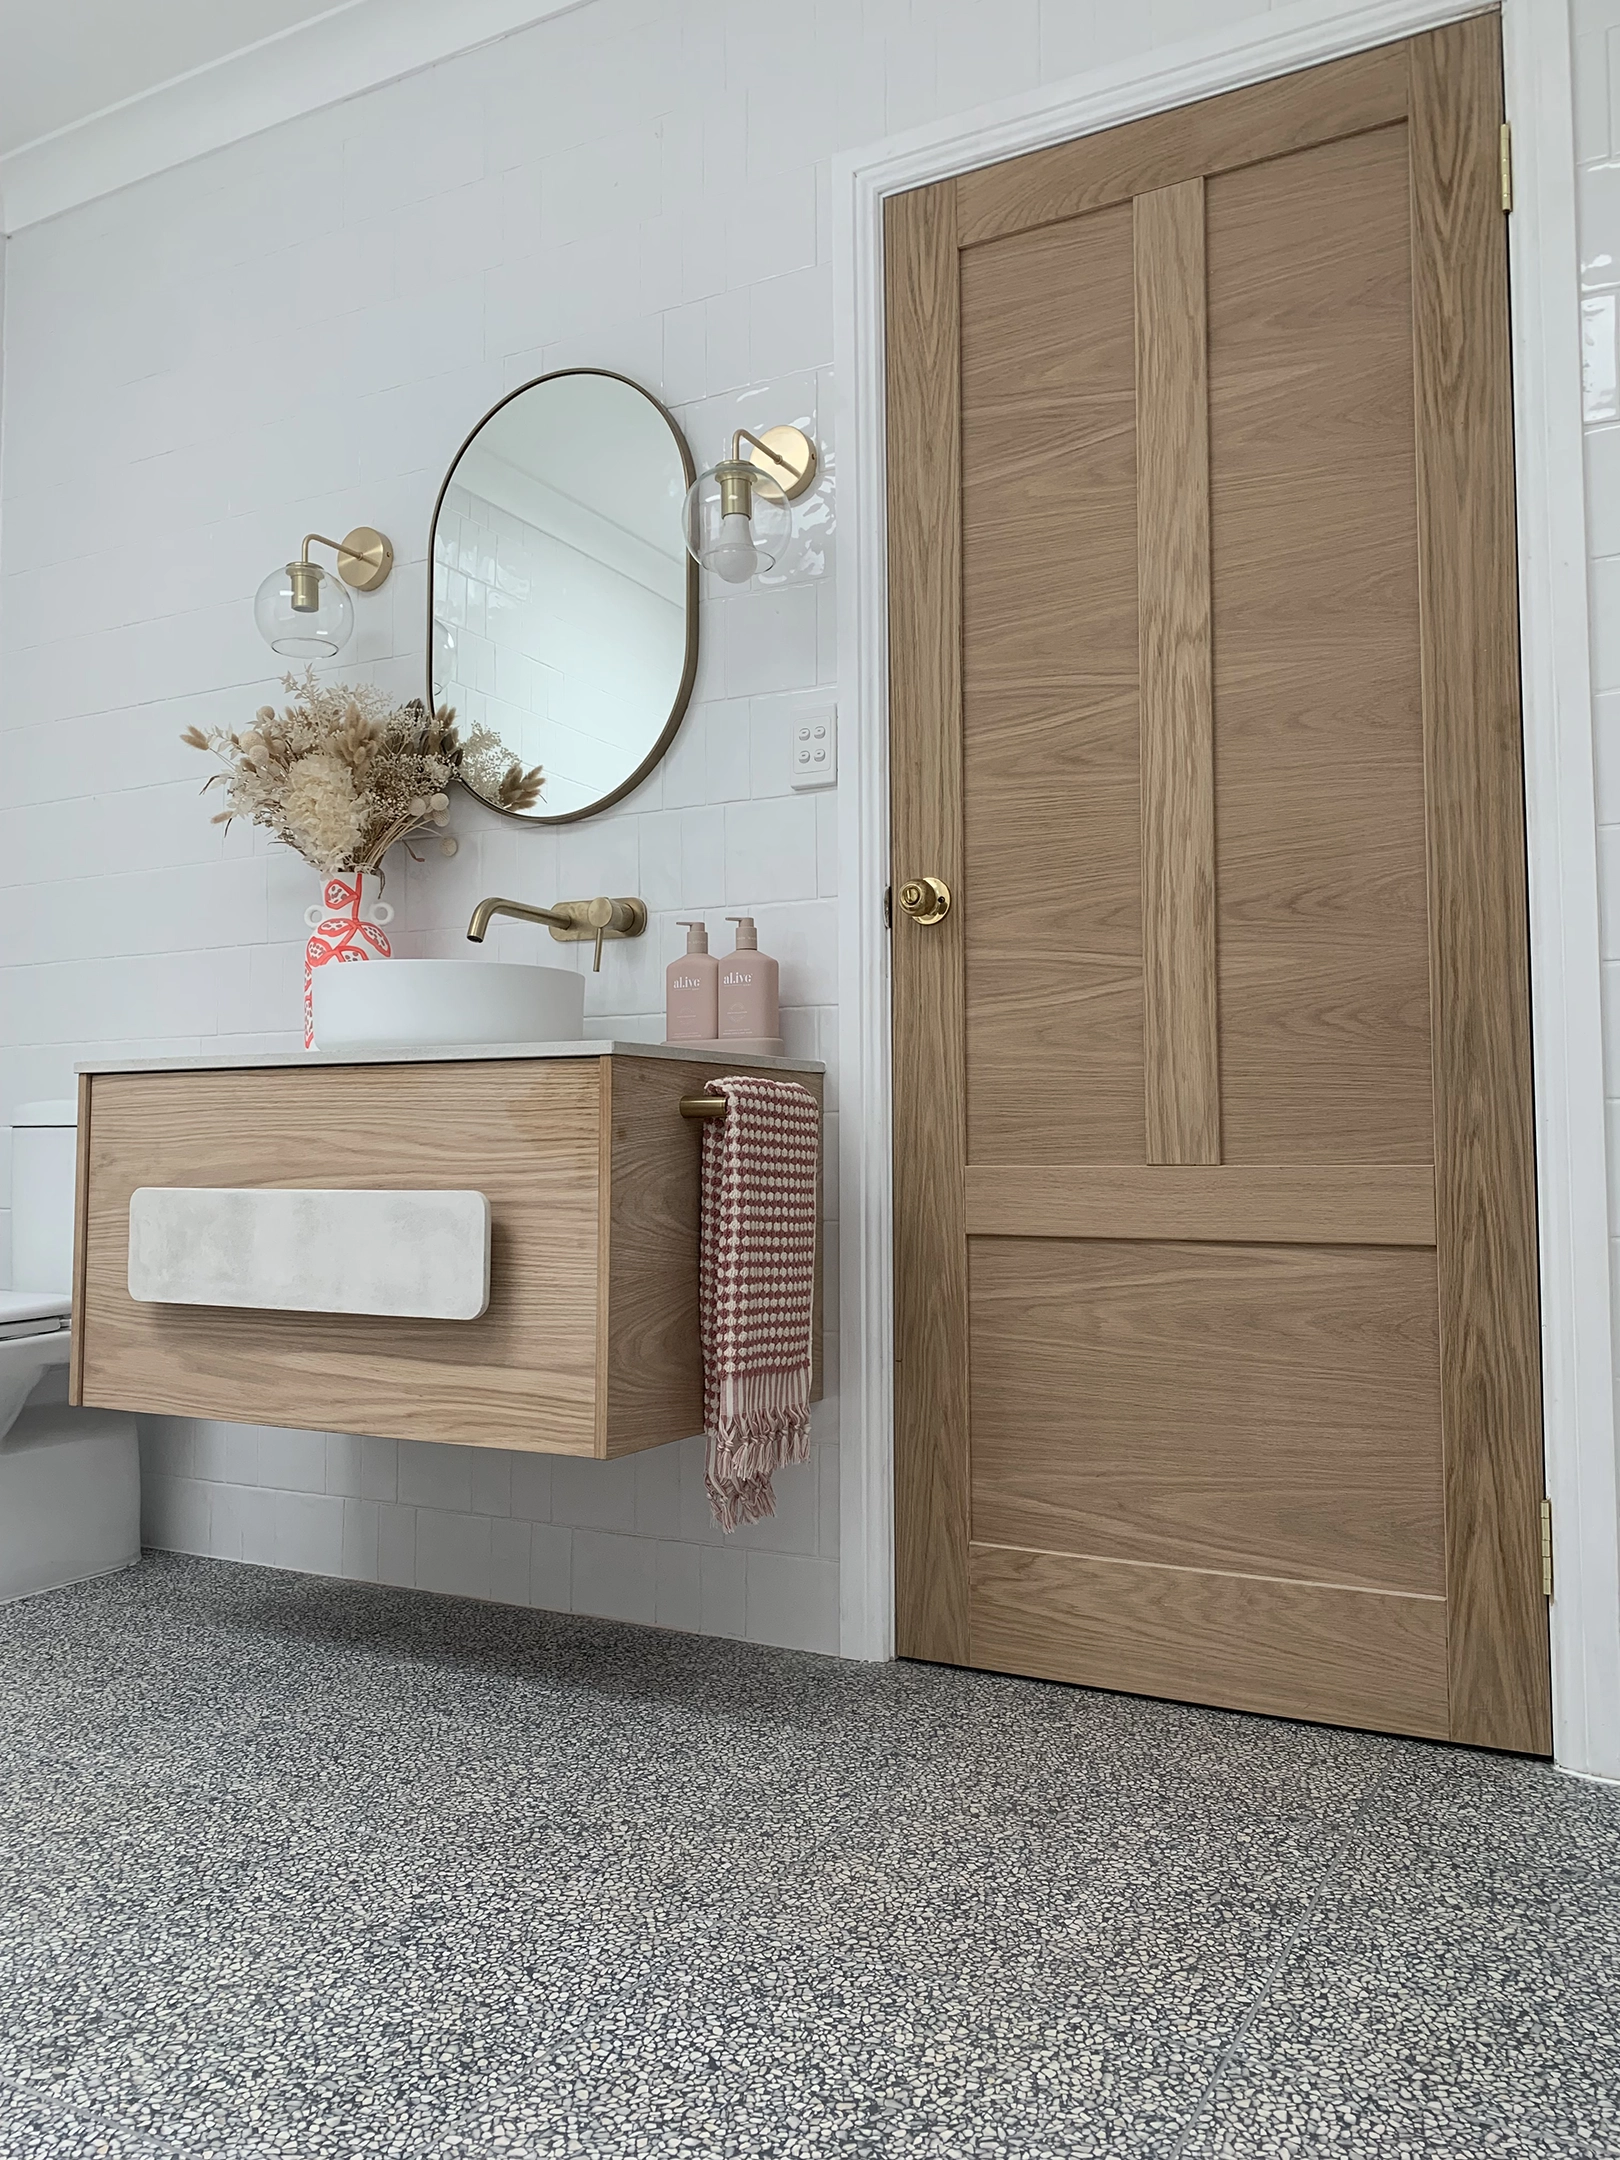 Bathroom with timber vanity